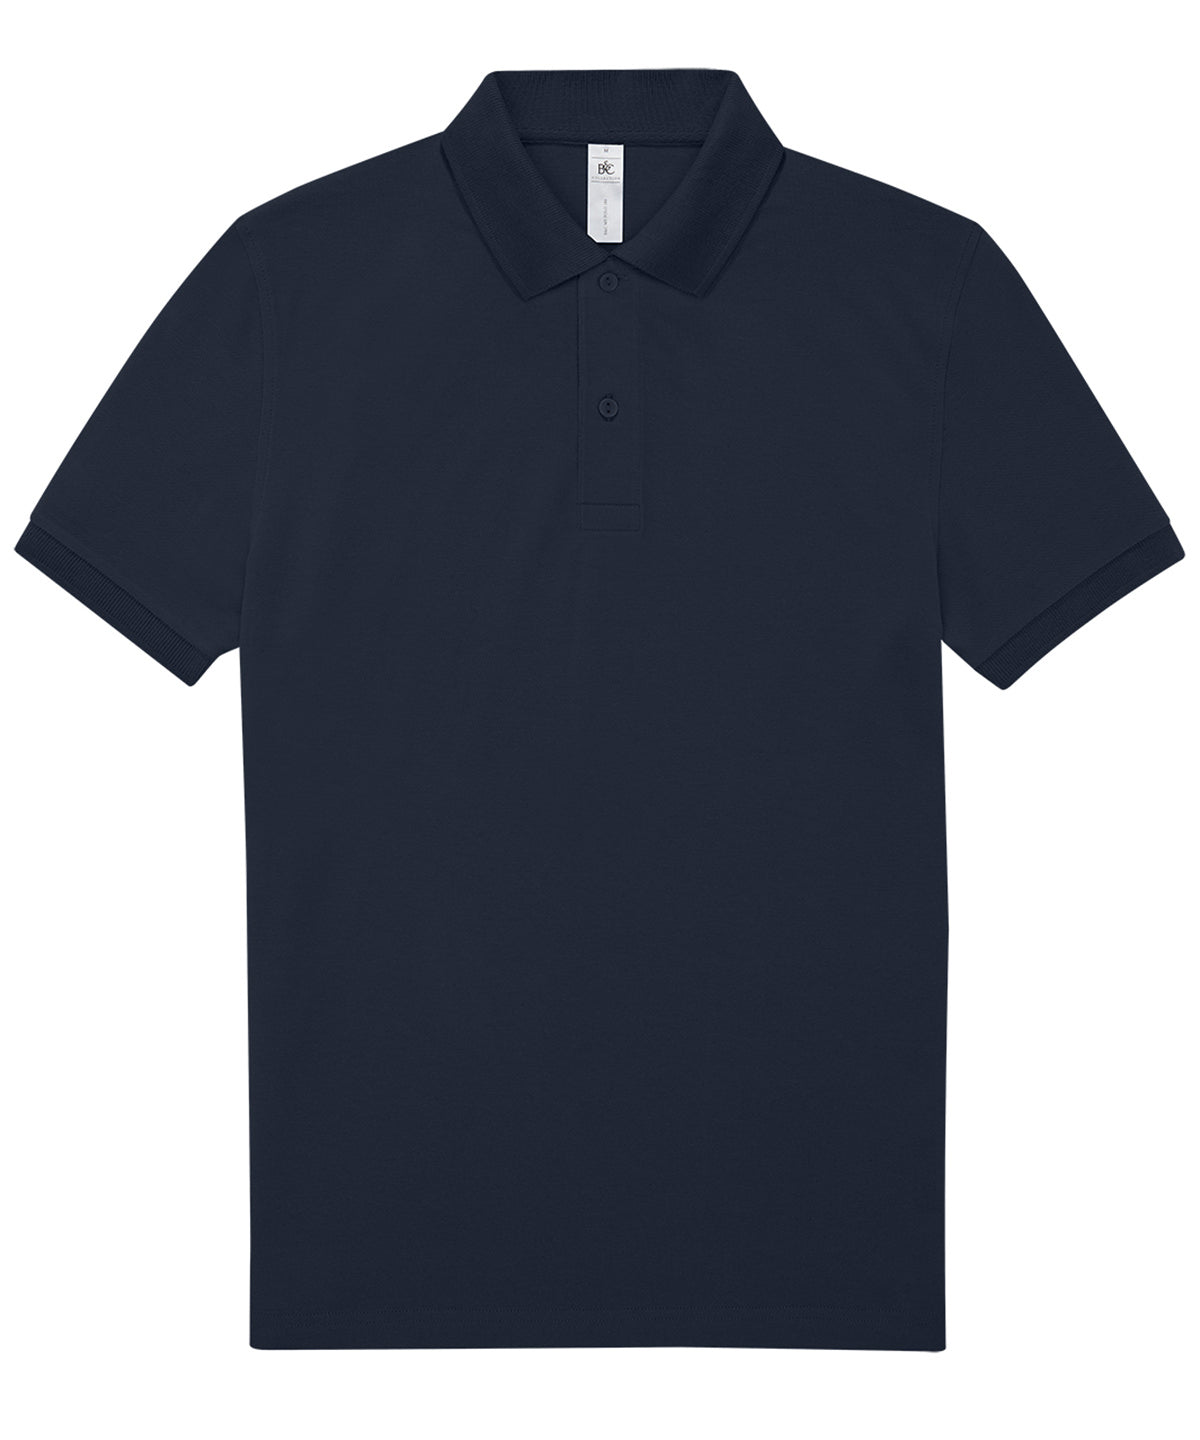 B&C Collection My Polo 180 Navy